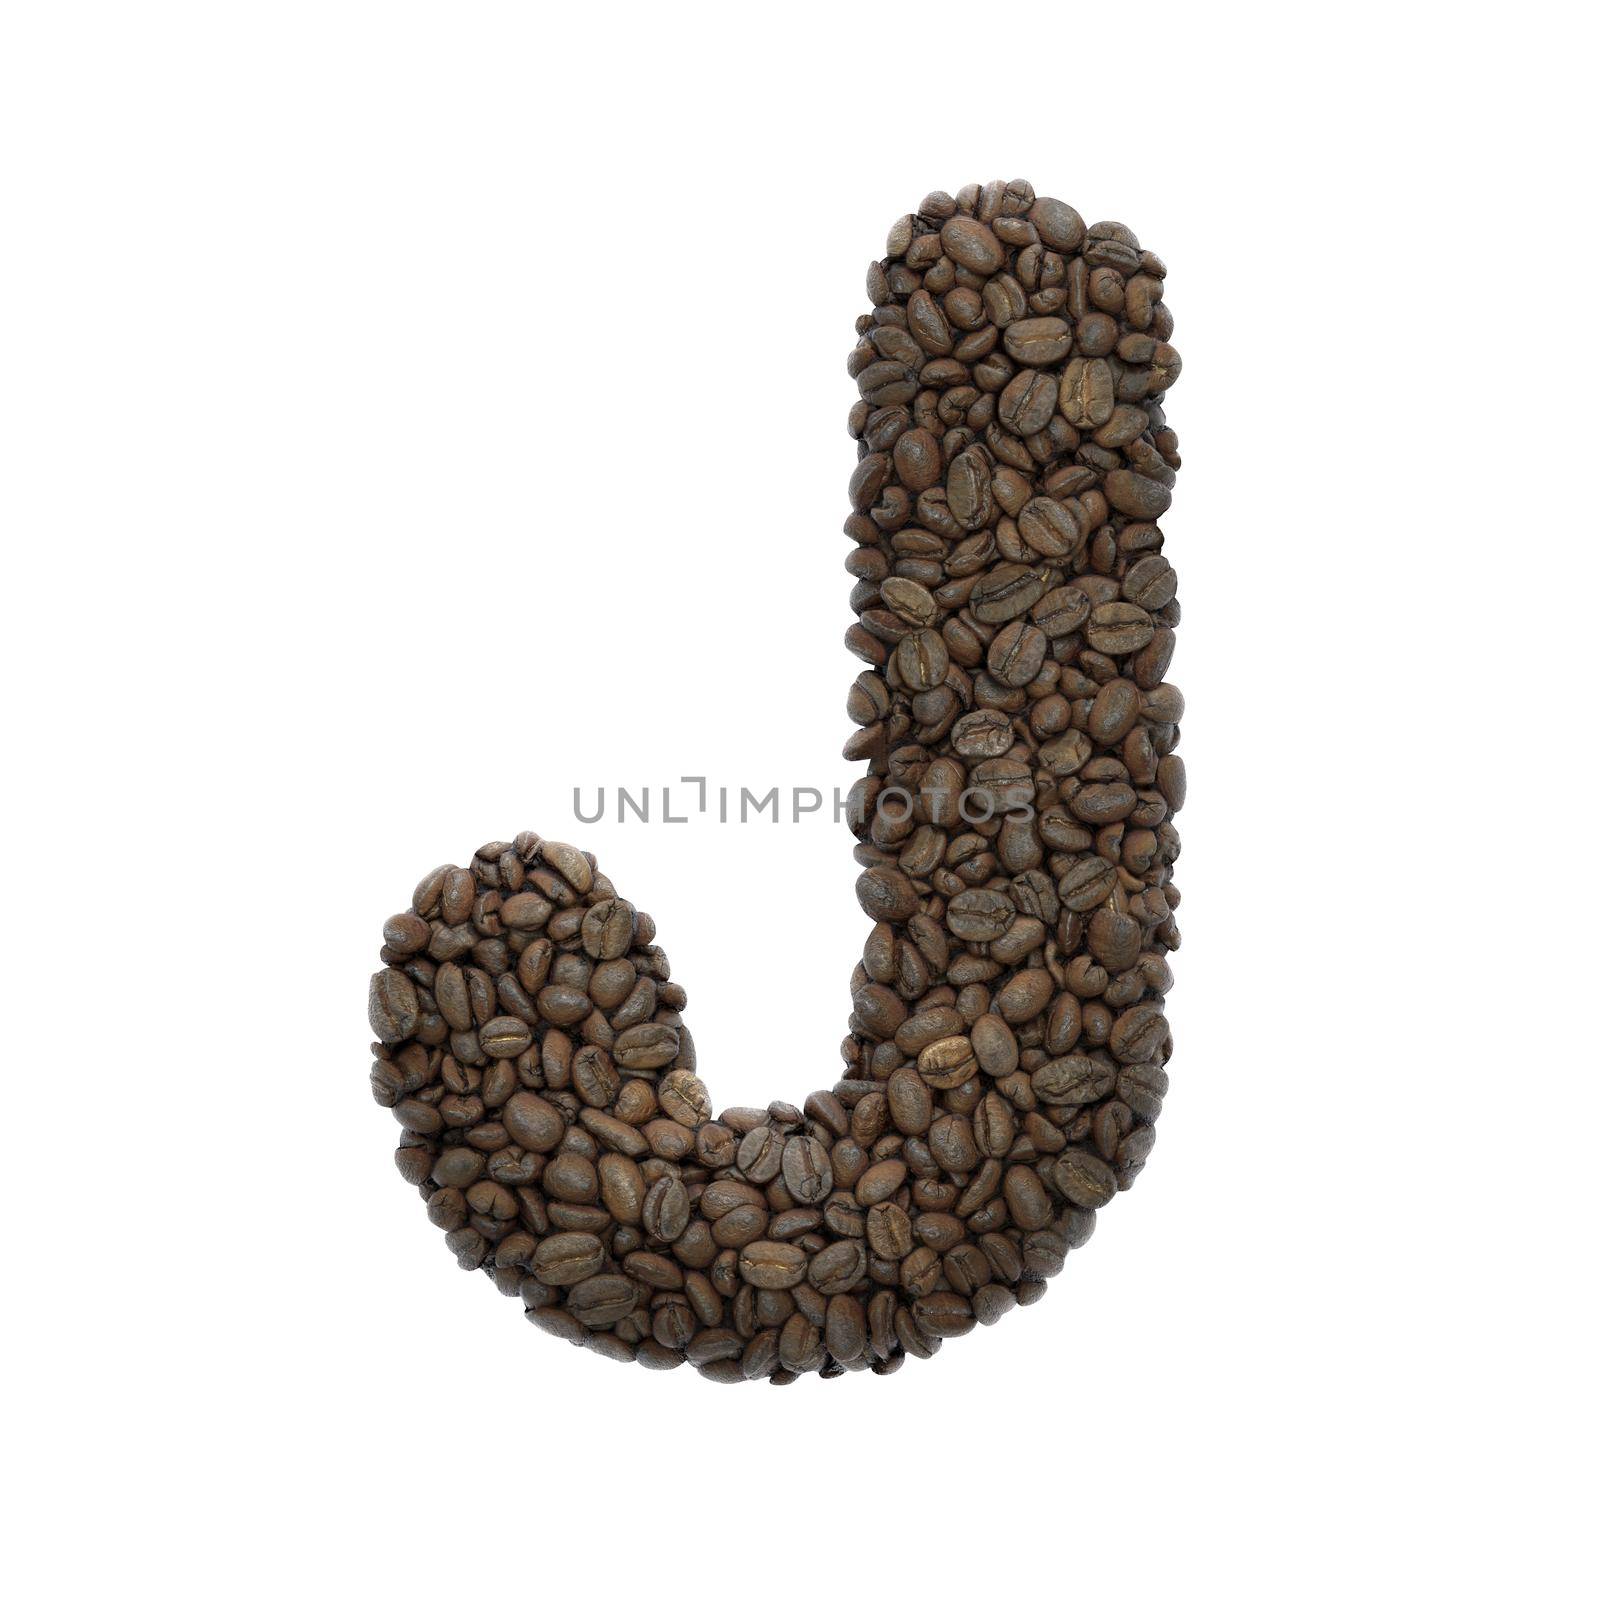 Coffee letter J - Uppercase 3d roasted beans font - suitable for Coffee, energy or insomnia related subjects by chrisroll